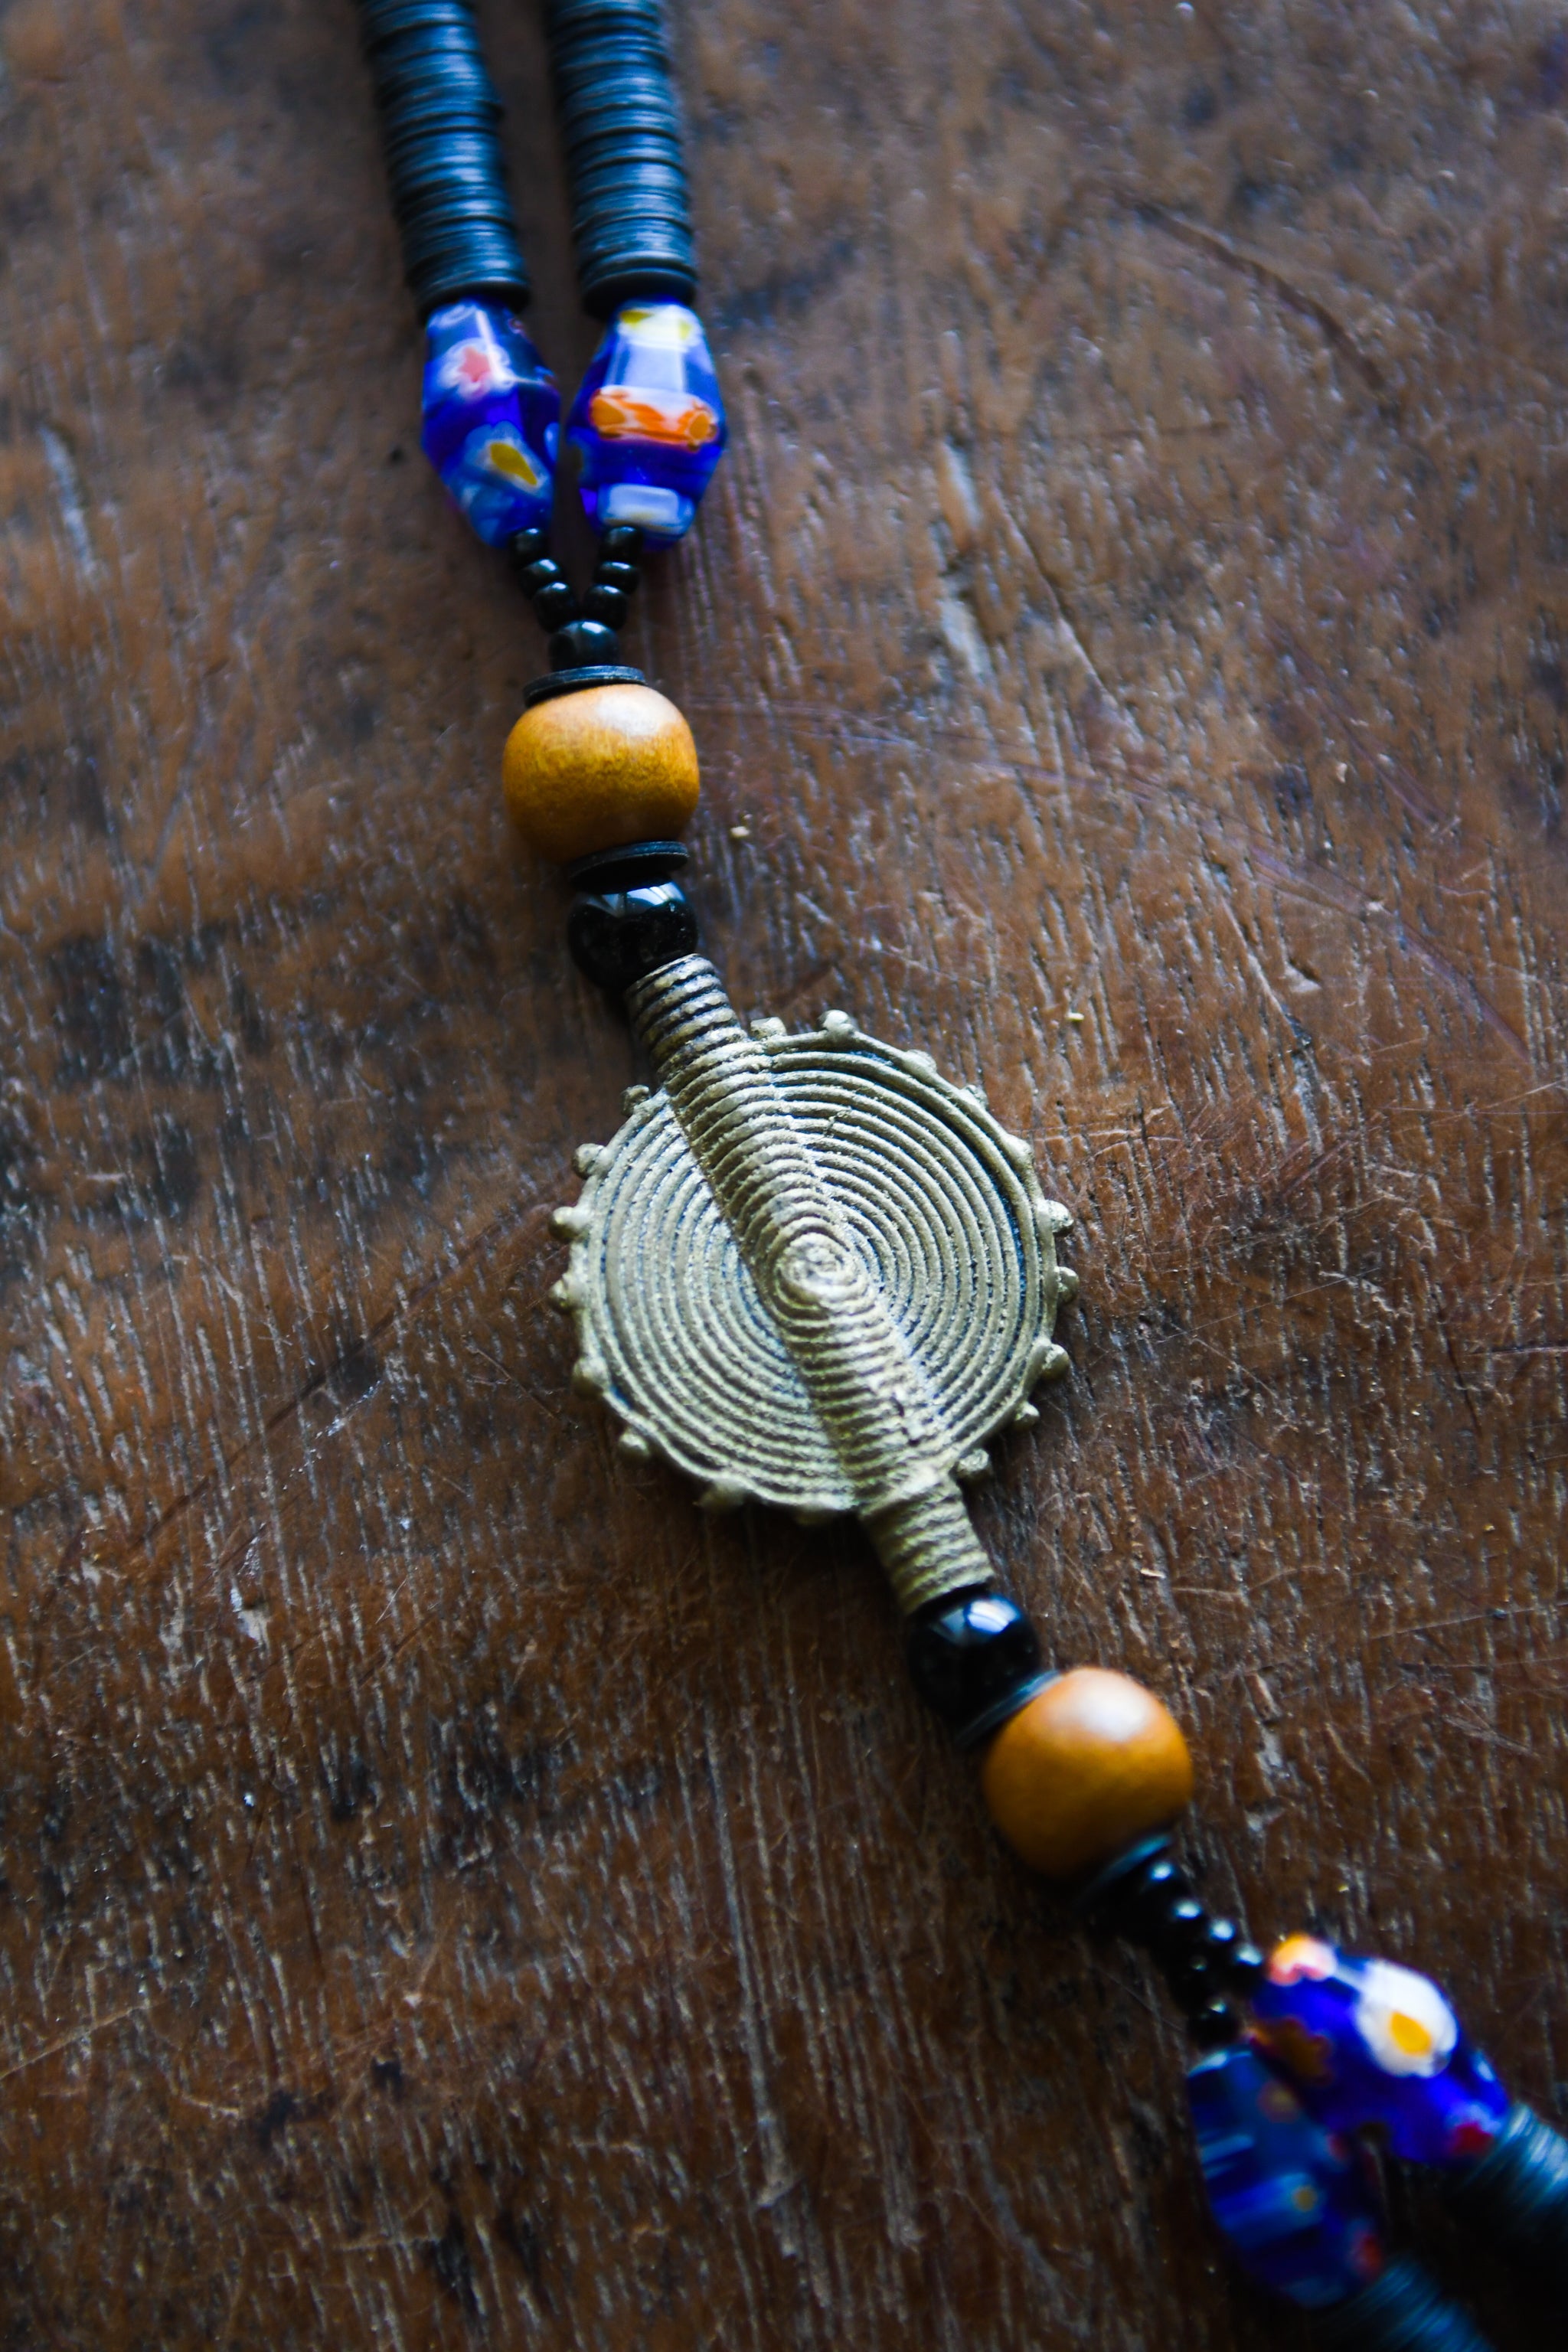 Tribal Necklaces - Traditional - Folk Art - African - Objects - Artifacts - Collectible - Beads Bronze Pendant - Flair Any Outfit - Crafted Bronze - Featuring African Tribal Design - Striking Piece Jewelry - Statement 